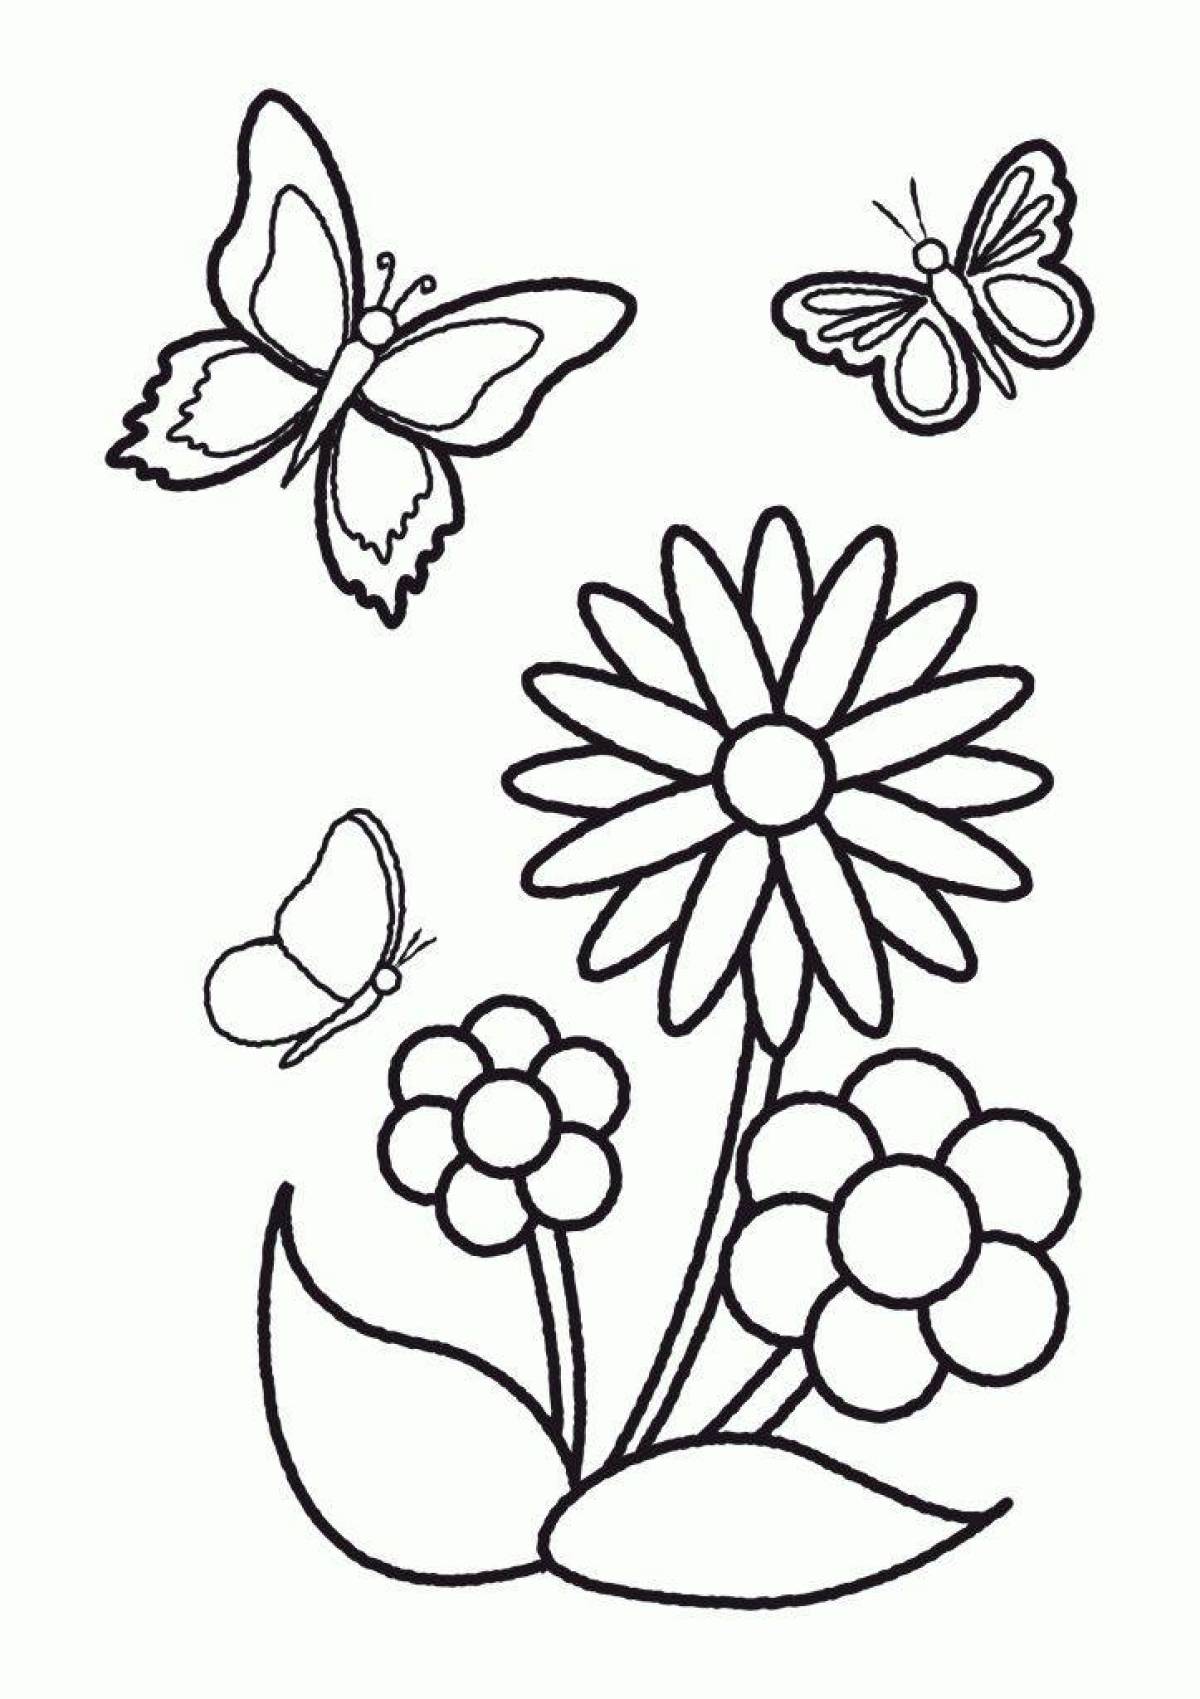 Adorable flower coloring book for 4-5 year olds